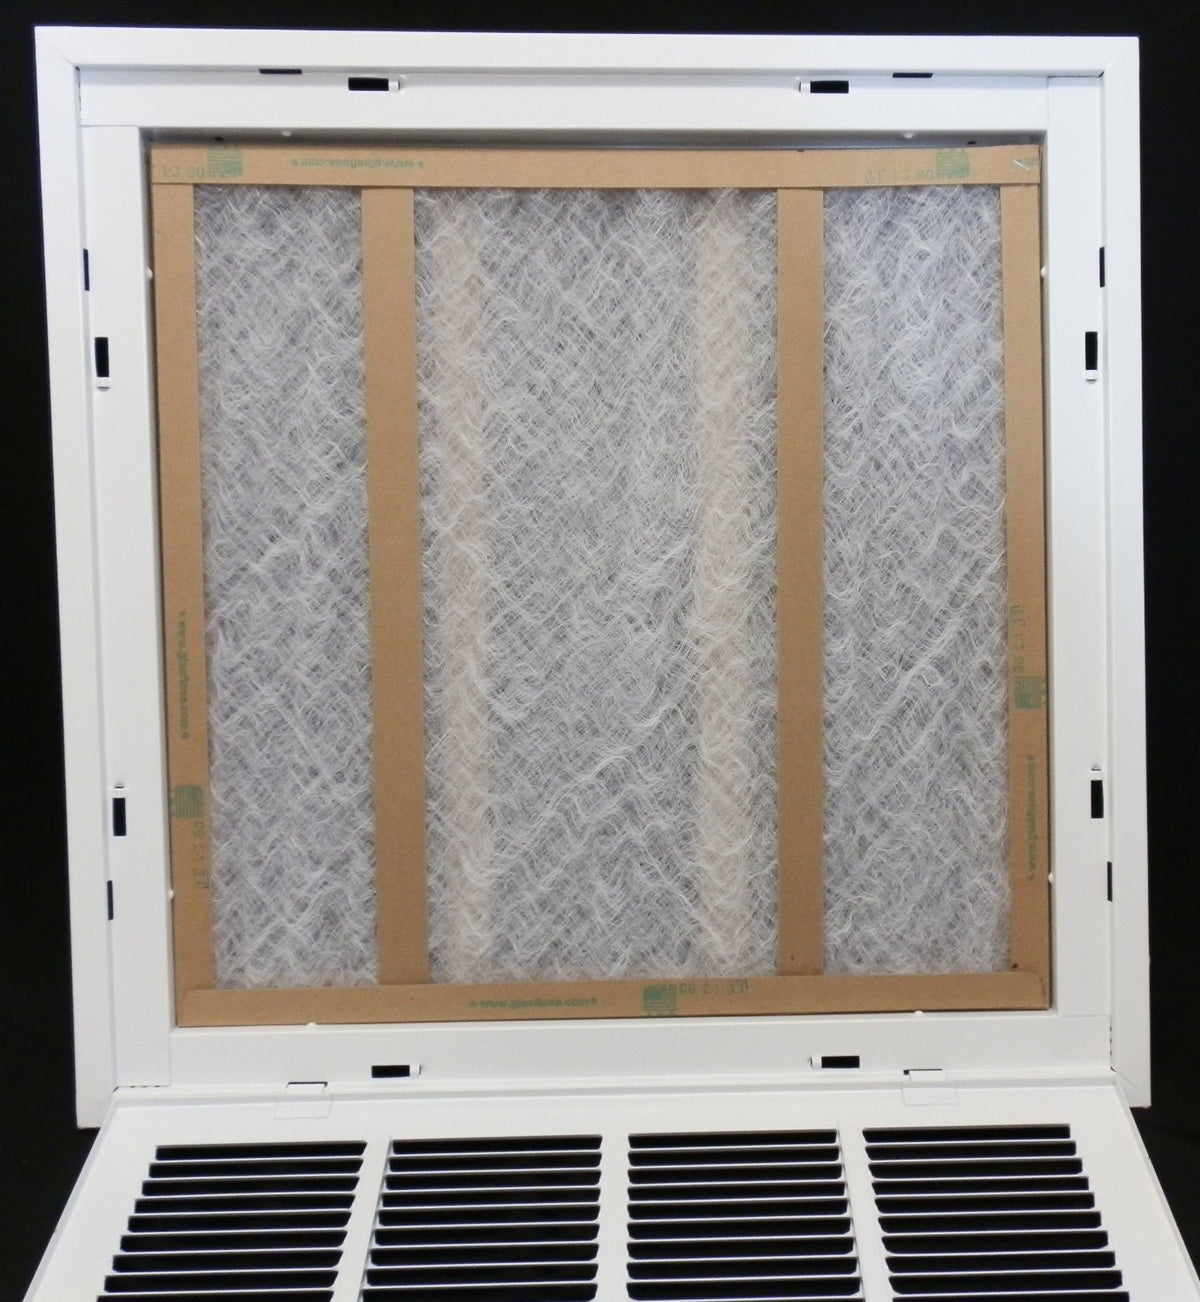 30&quot; X 12&quot; Steel Return Air Filter Grille for 1&quot; Filter - Removable Frame - [Outer Dimensions: 32 5/8&quot; X 14 5/8&quot;]